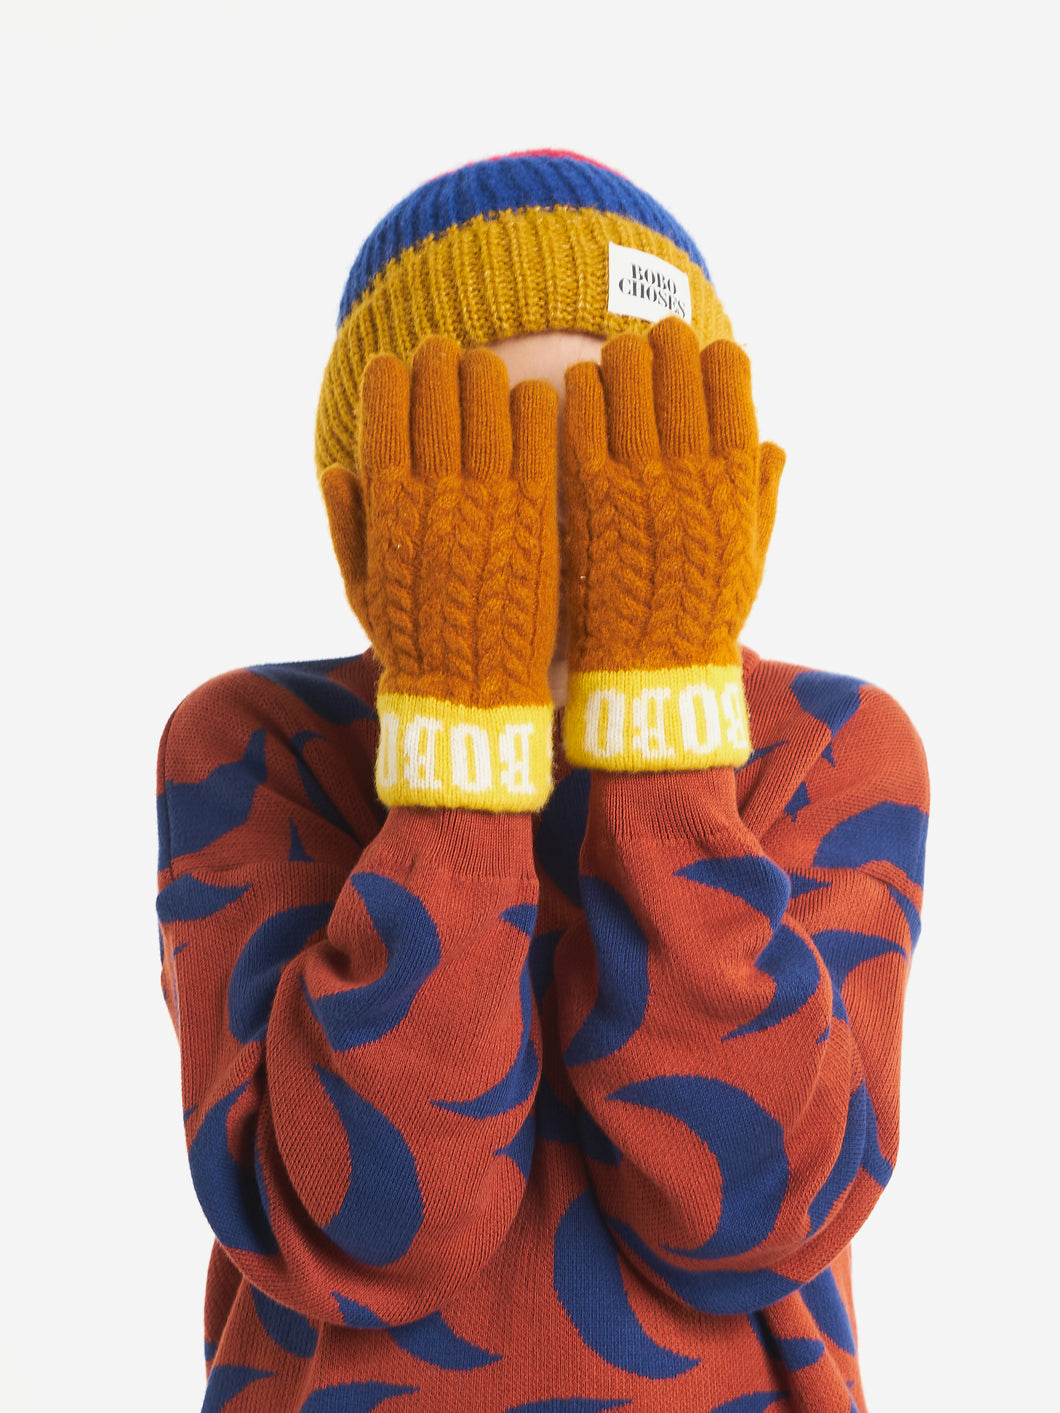 Bobo knitted gloves / ボボショーズ キッズグローブ 子供用手袋